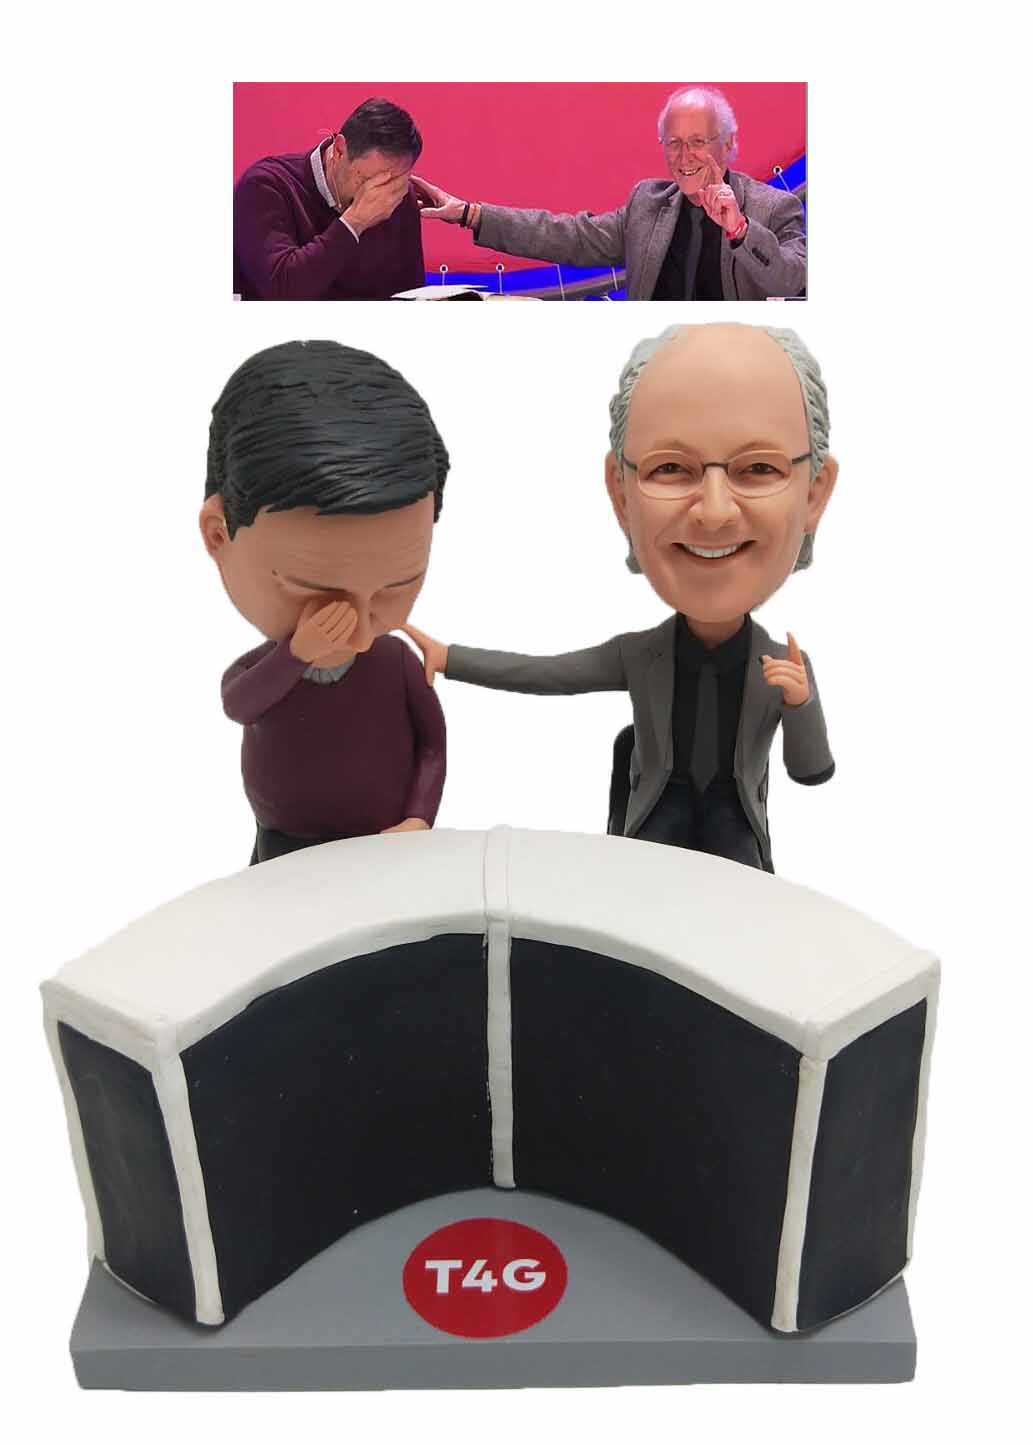 Custom Bobbleheads Personalized Bobble Heads Television Presenters